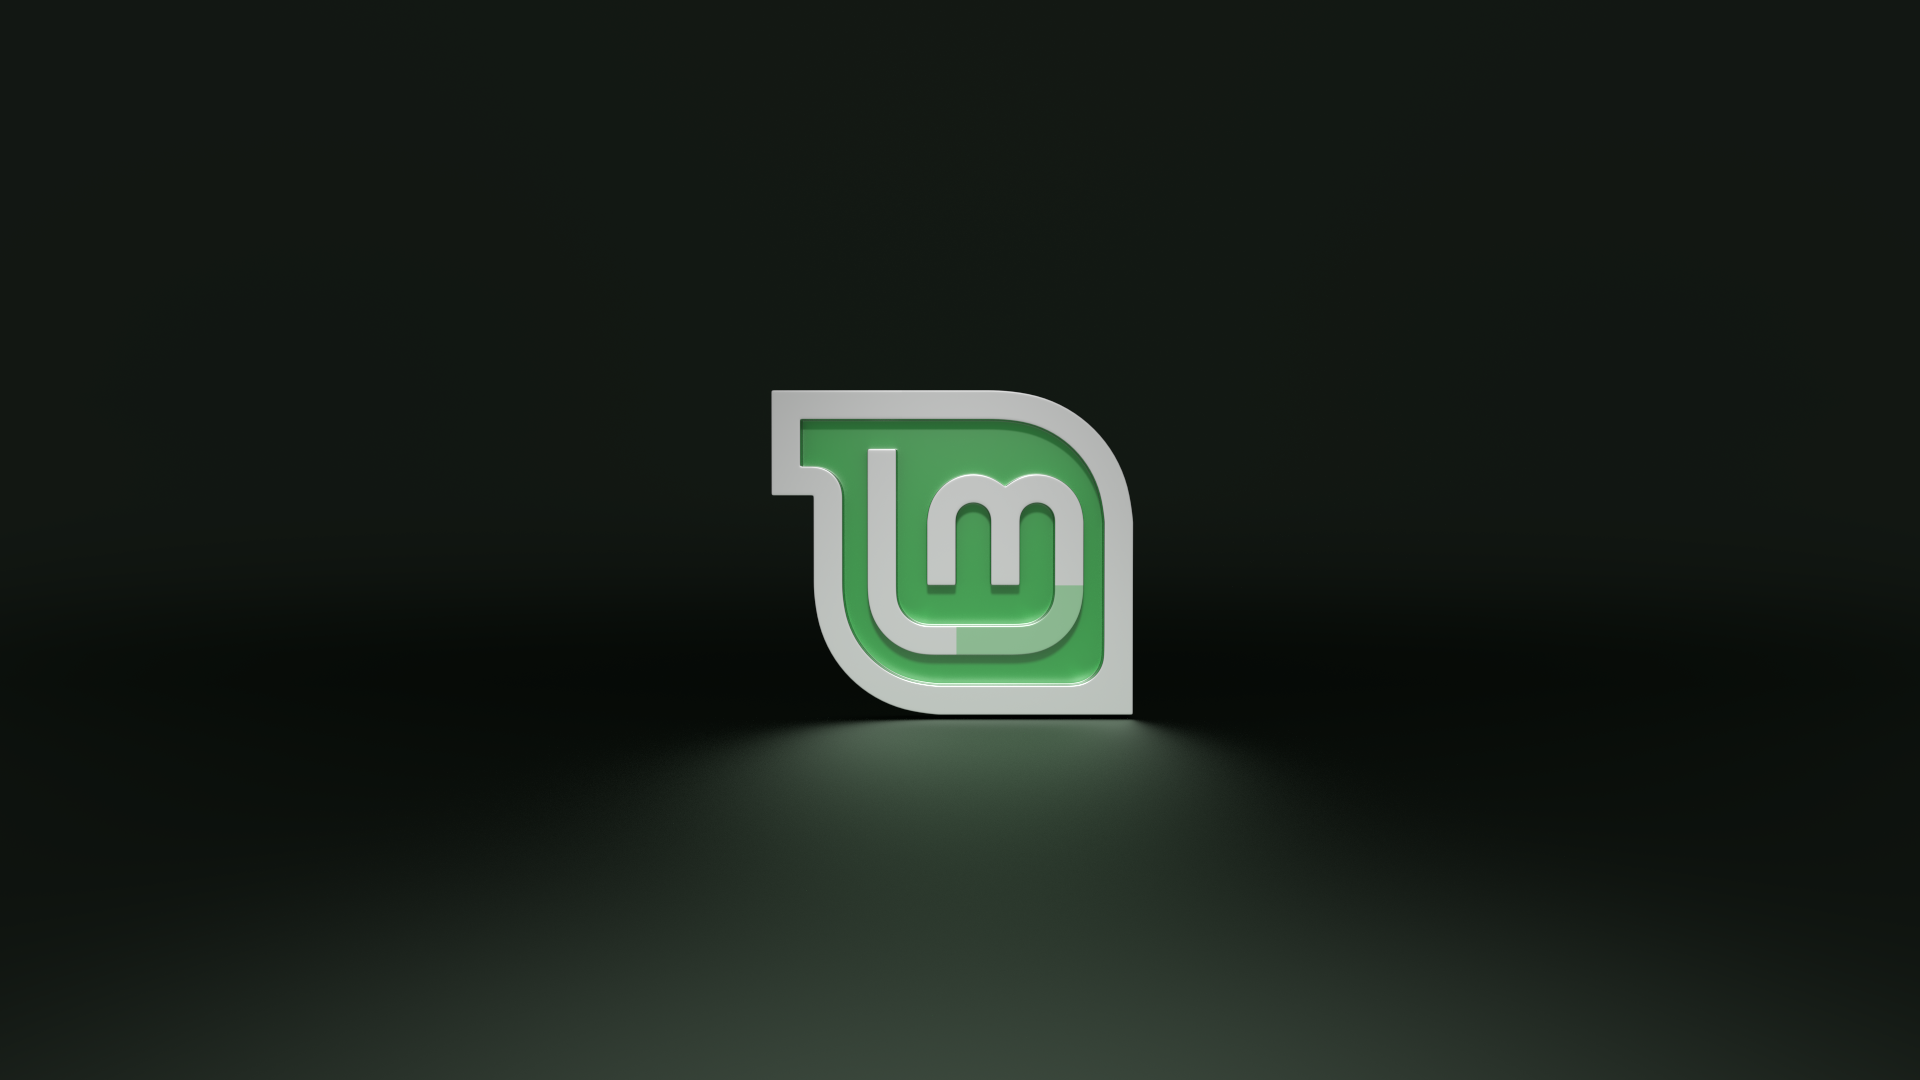 Linux Mint 1920X1080 Wallpapers